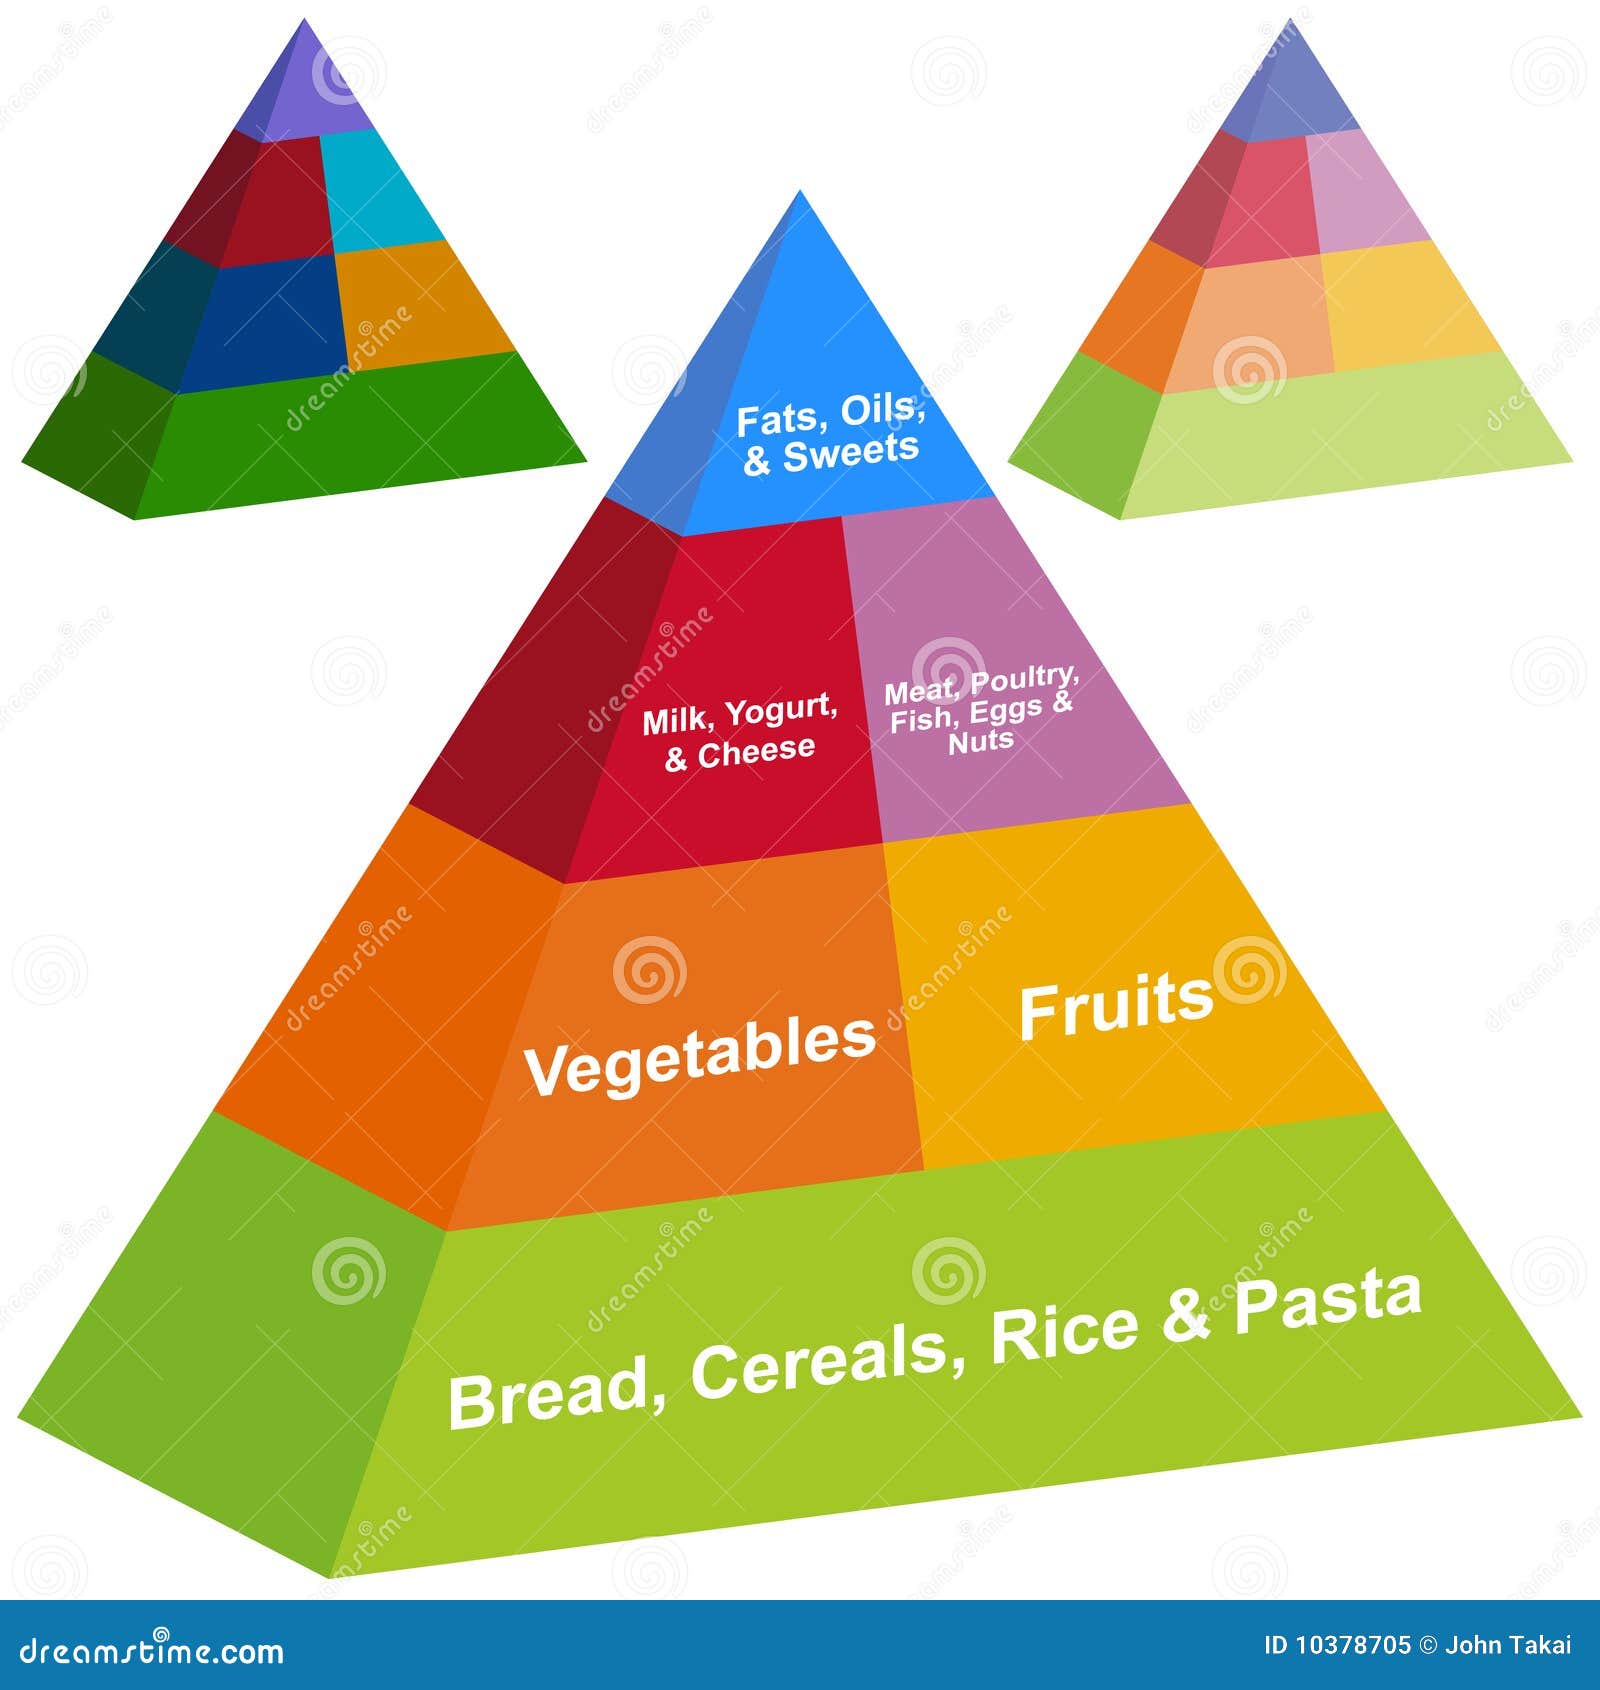 3D Food Pyramid stock vector. Illustration of carbs, cheese - 10378705